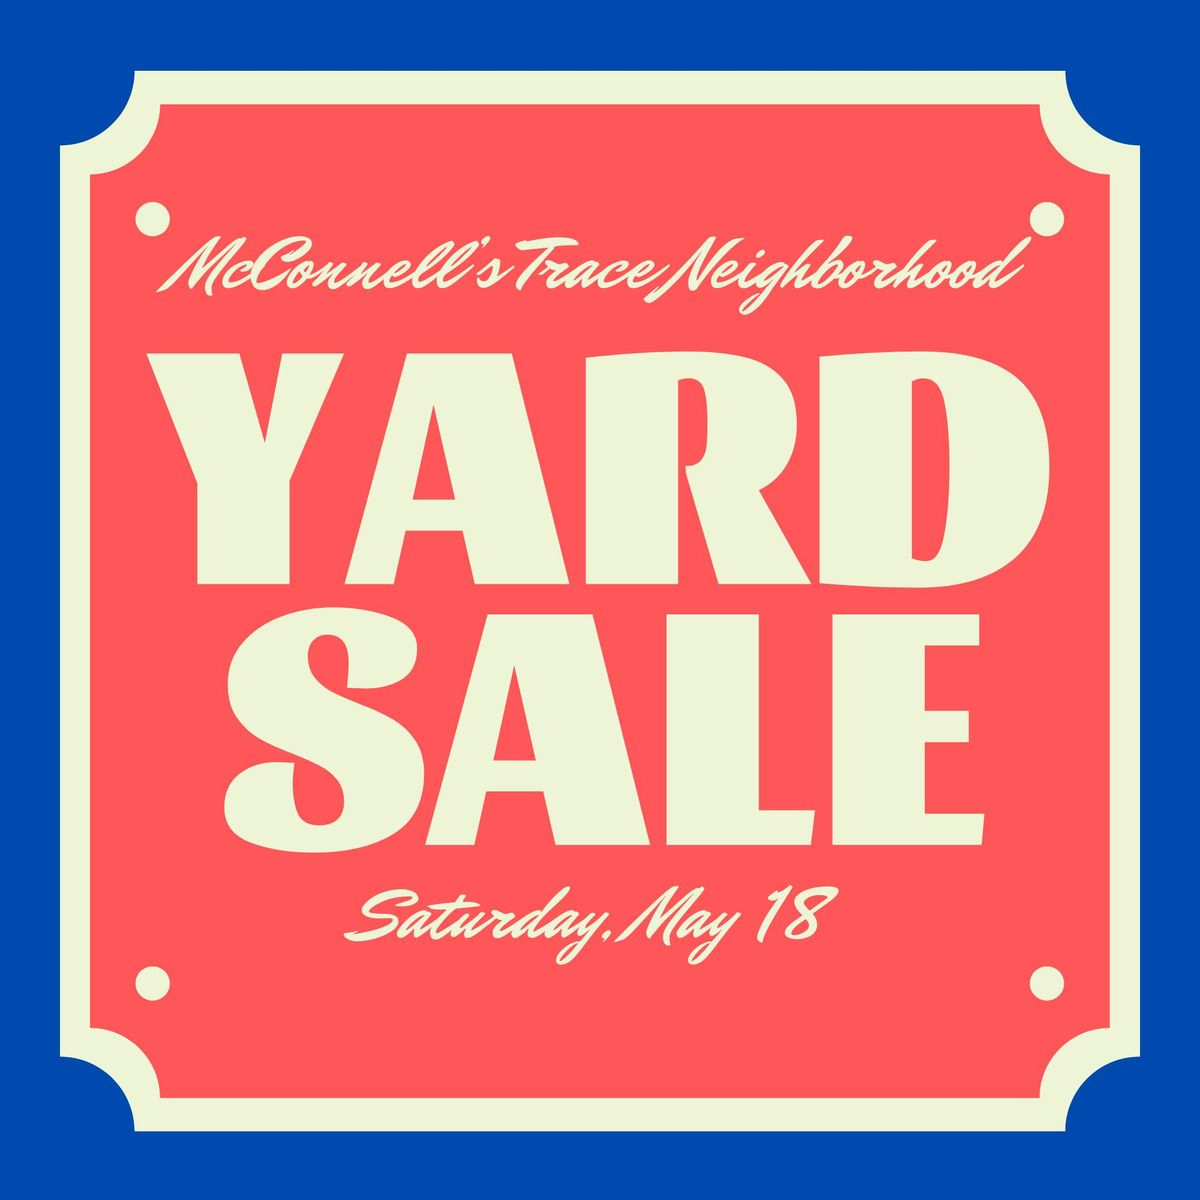 McConnell's Trace Yard Sale